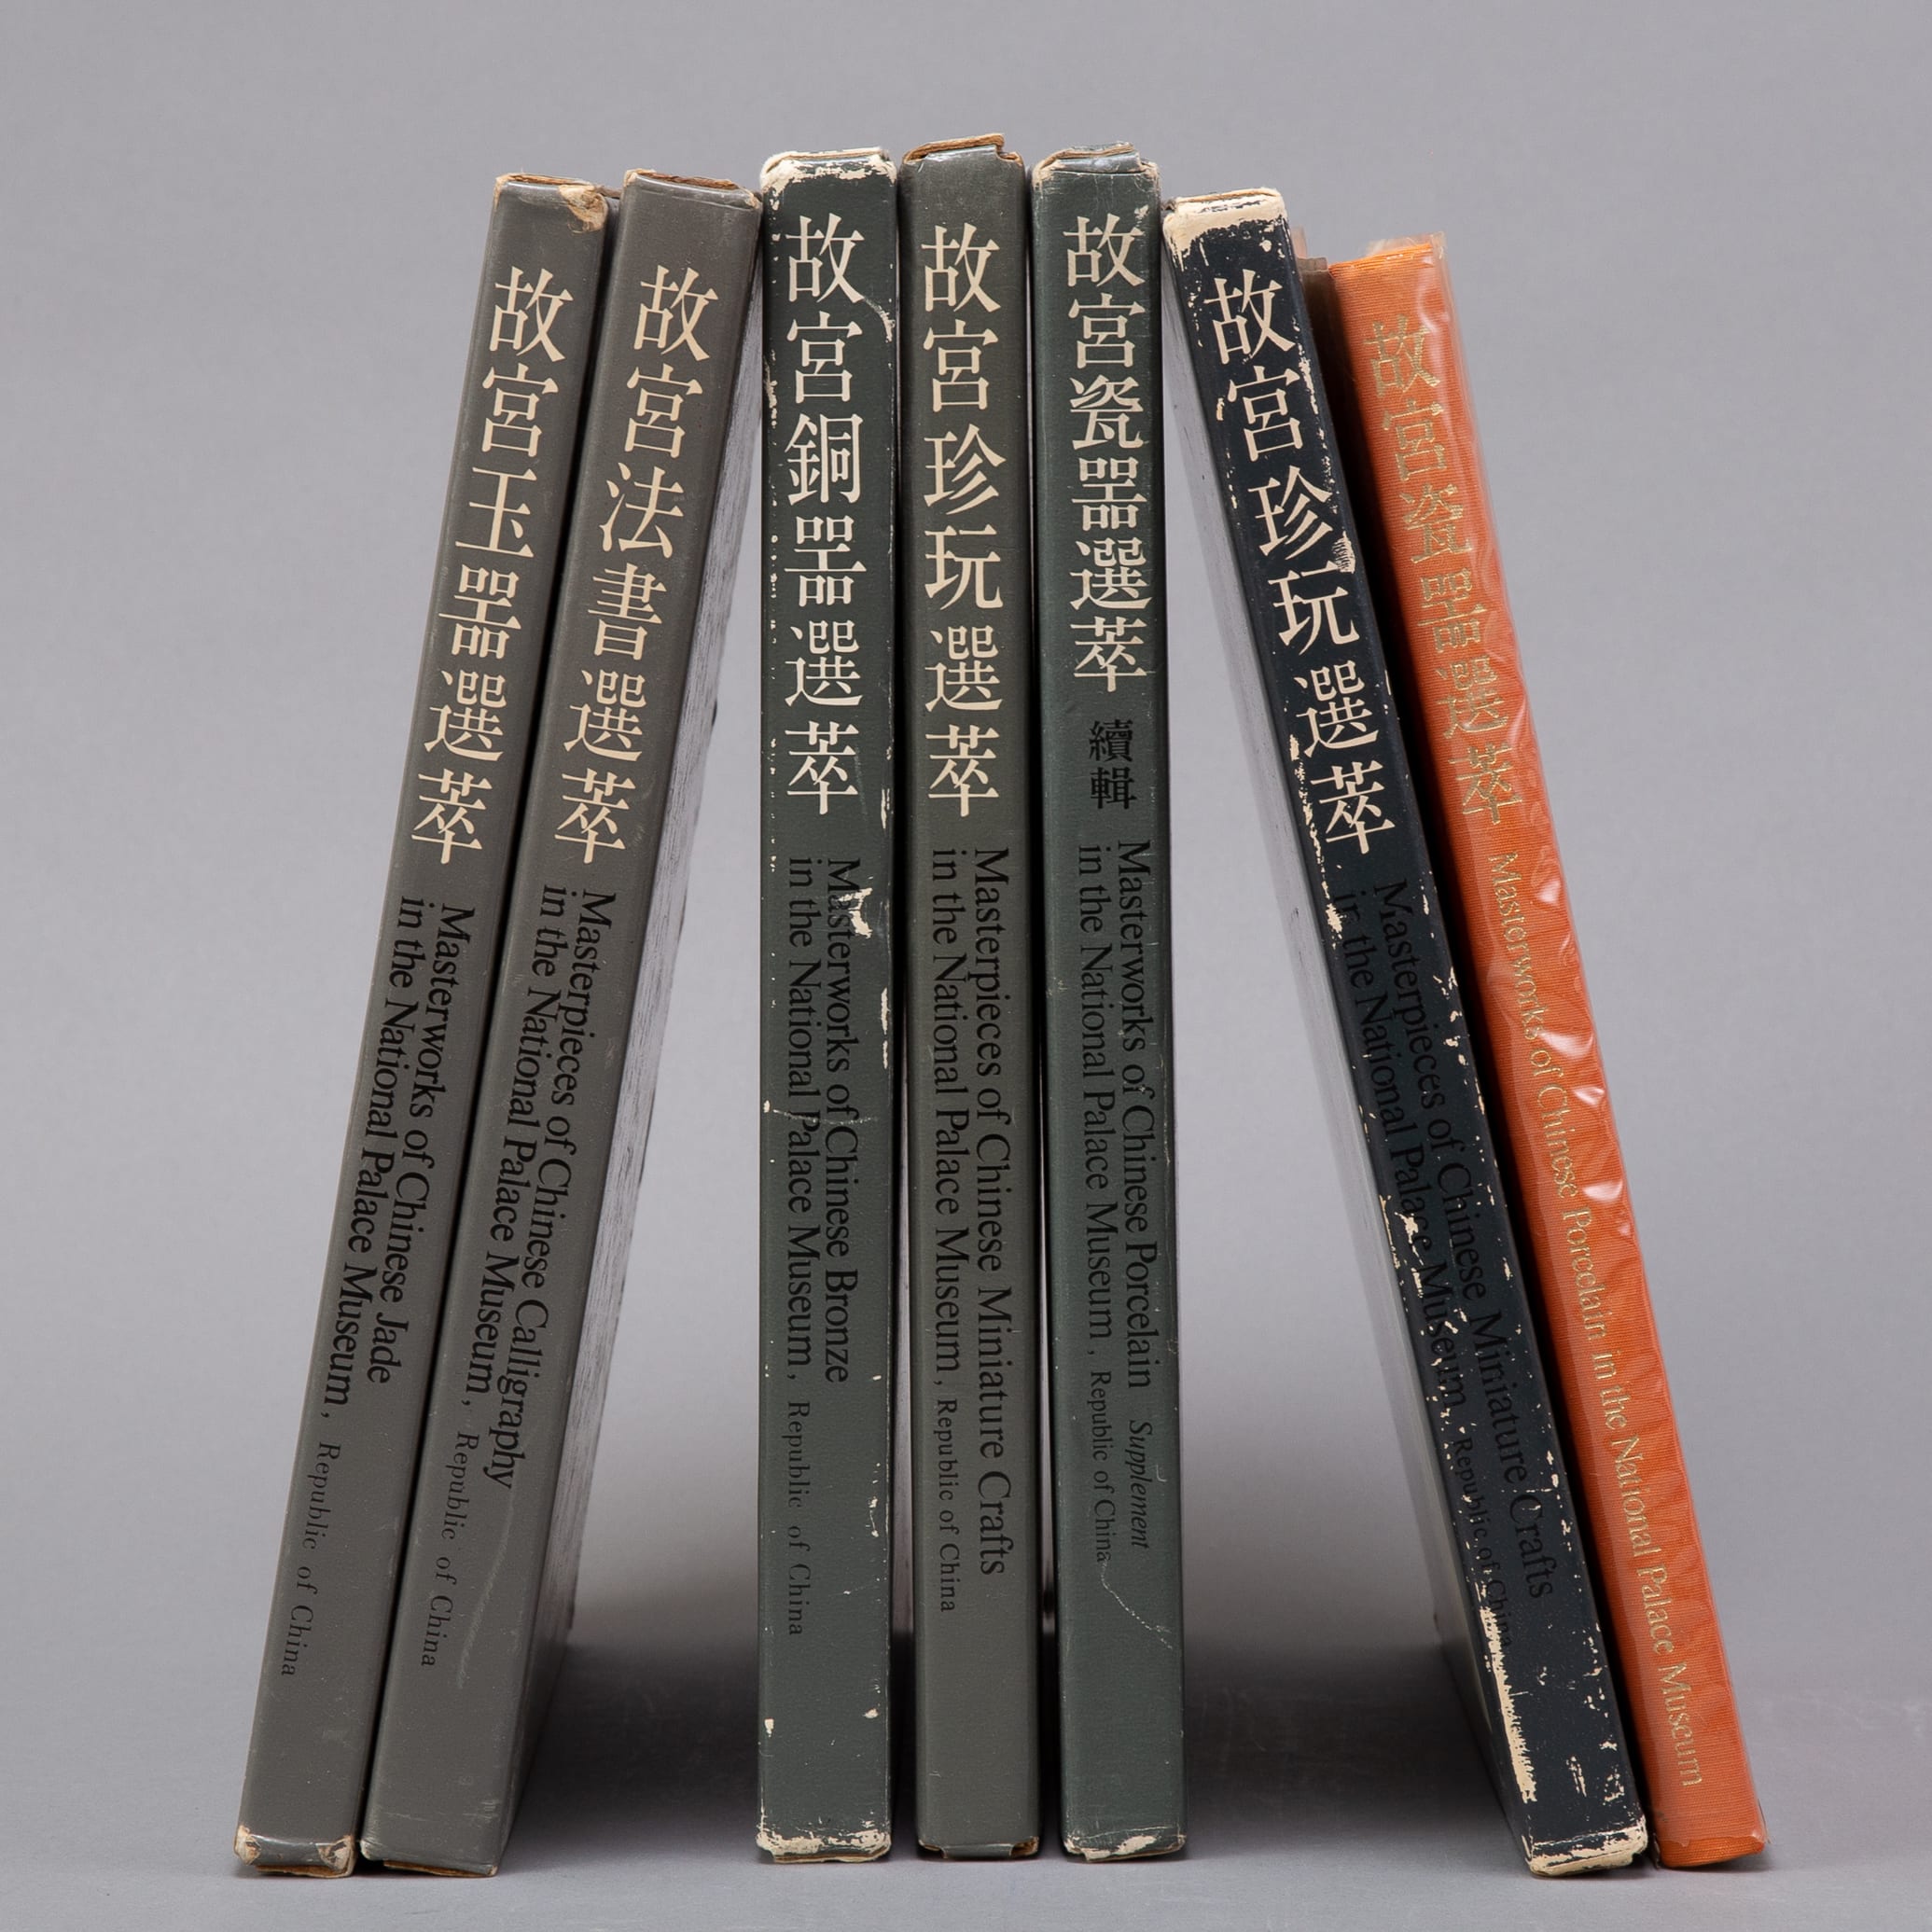 Lot 299: Group of 7 Books on the Palace Museum